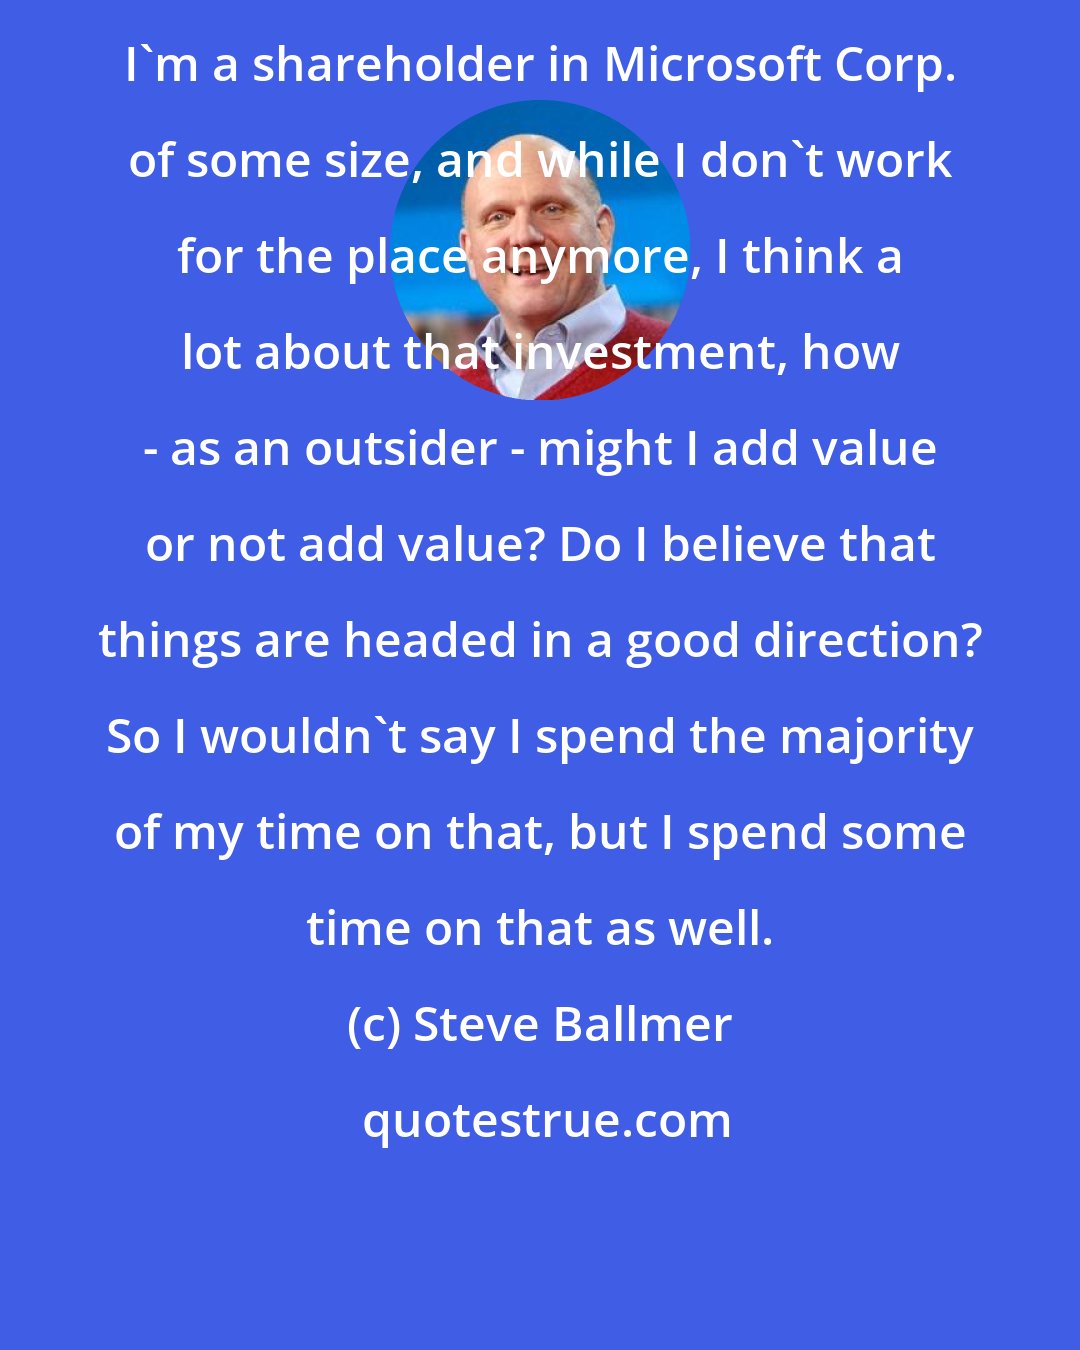 Steve Ballmer: I'm a shareholder in Microsoft Corp. of some size, and while I don't work for the place anymore, I think a lot about that investment, how - as an outsider - might I add value or not add value? Do I believe that things are headed in a good direction? So I wouldn't say I spend the majority of my time on that, but I spend some time on that as well.